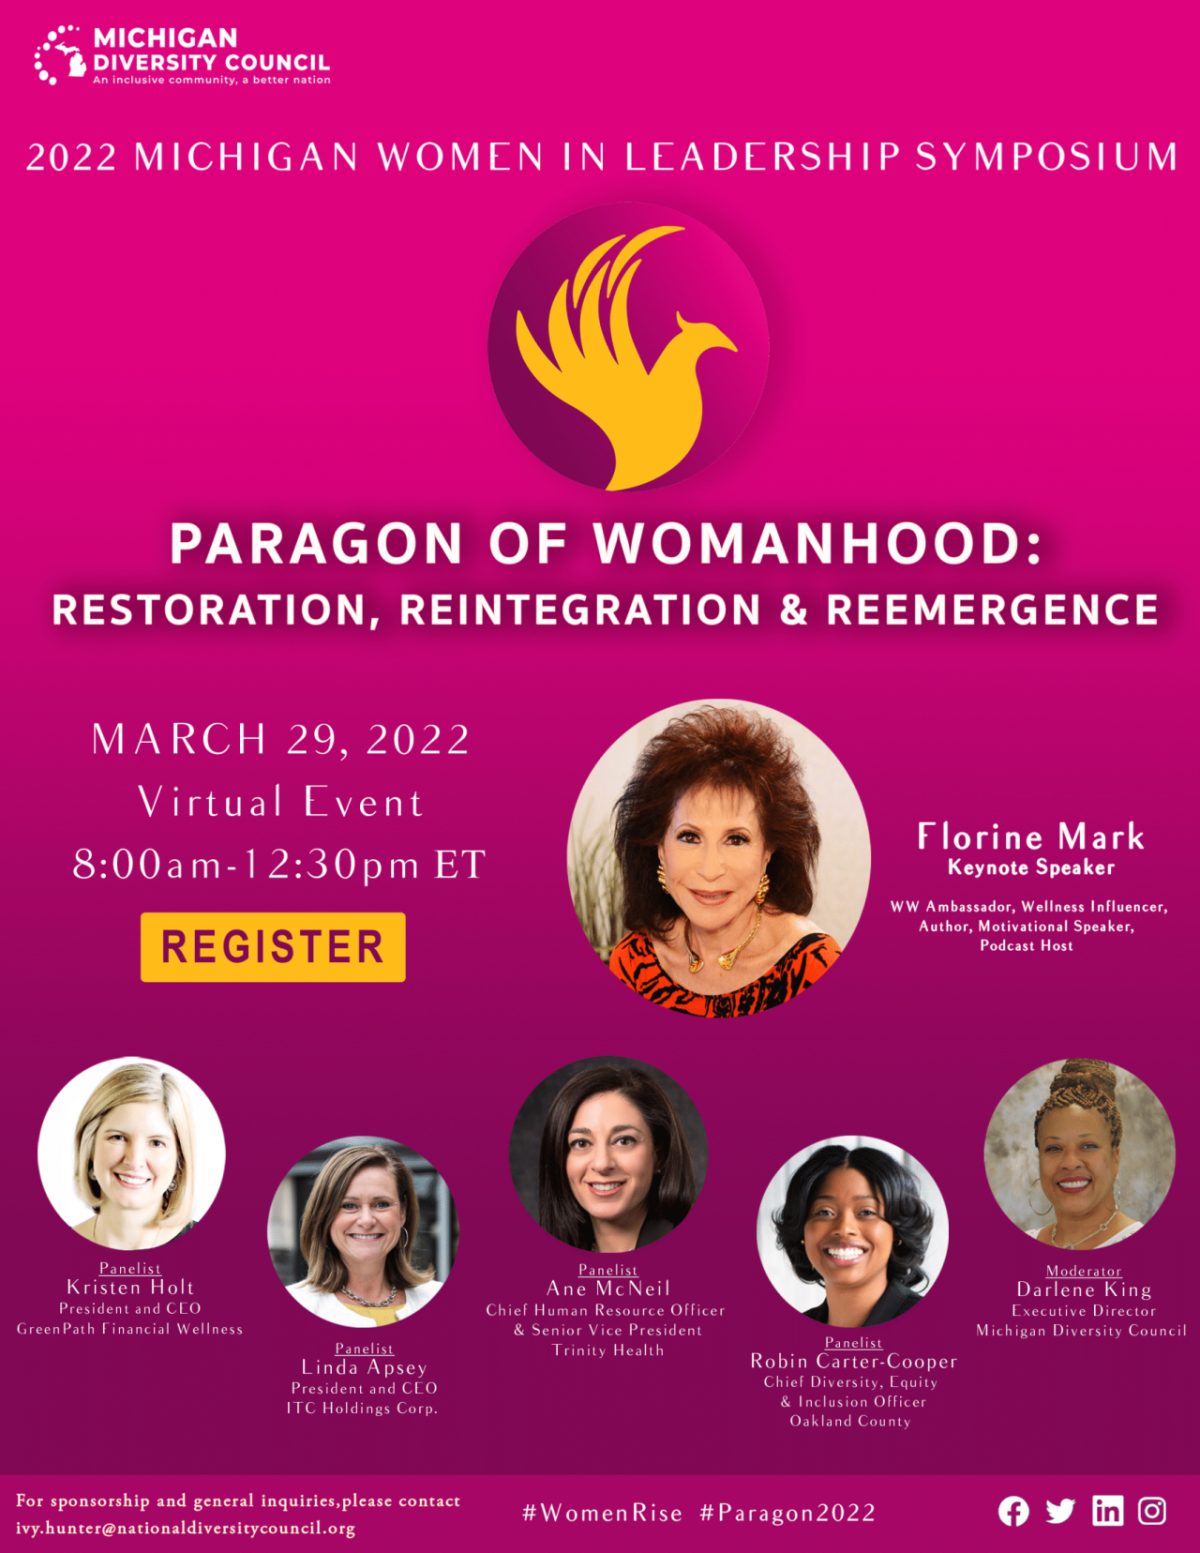 "Paragon of Womanhood: Resoration, Reinegration & Reemergence, March 29, 2022 Virtual Event 8am - 12:30pm ET"